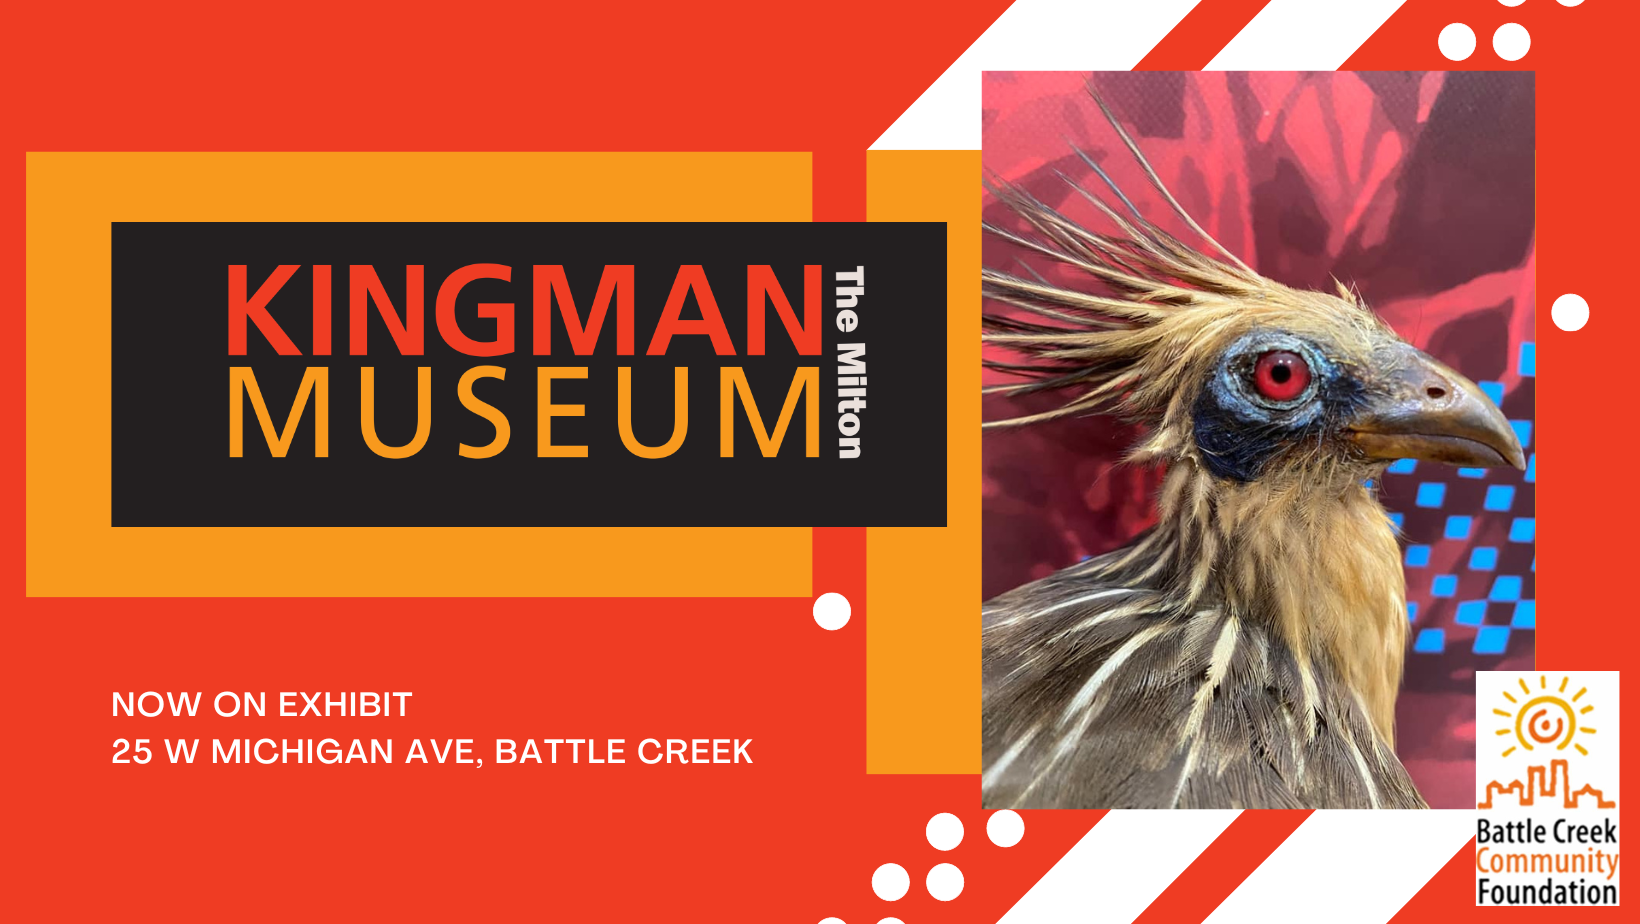 Kingman Museum exhibit currently on display at The Milton downtown Battle Creek